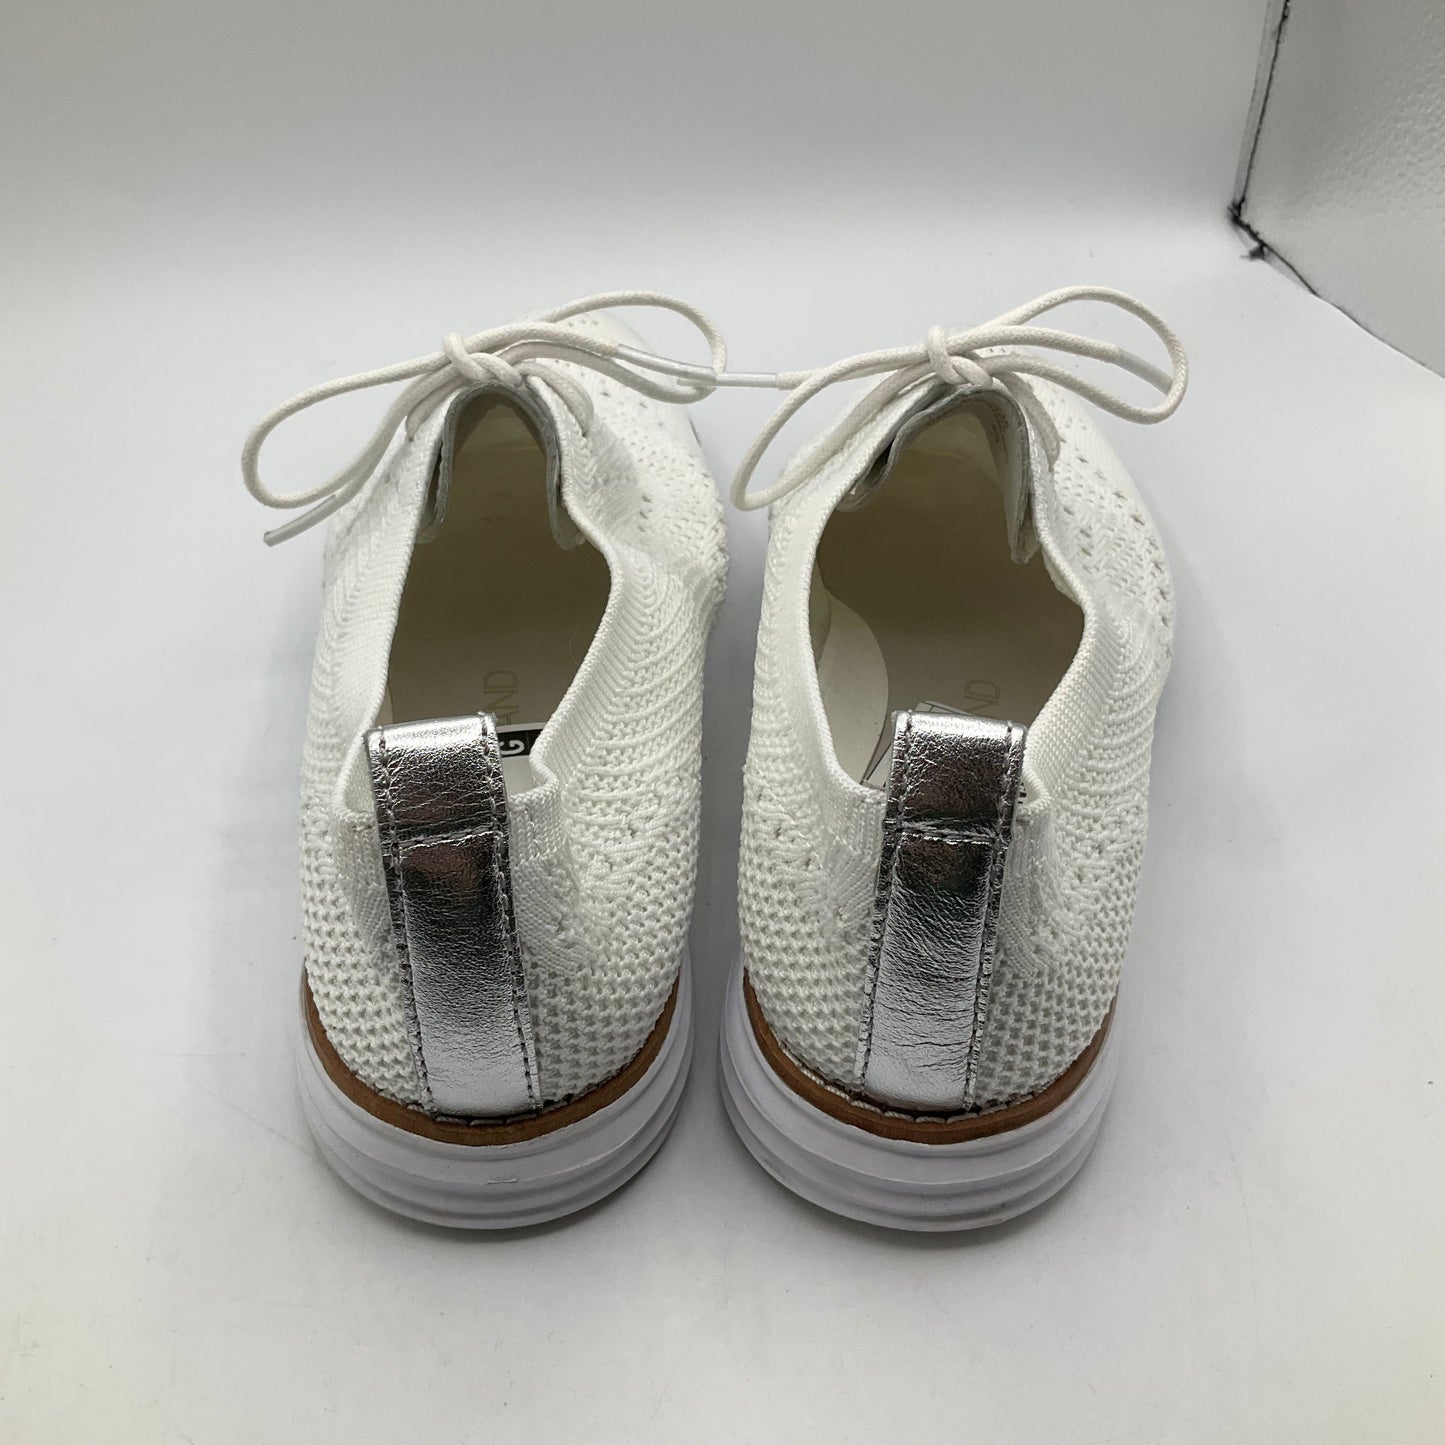 White Shoes Flats Cole-haan, Size 7.5